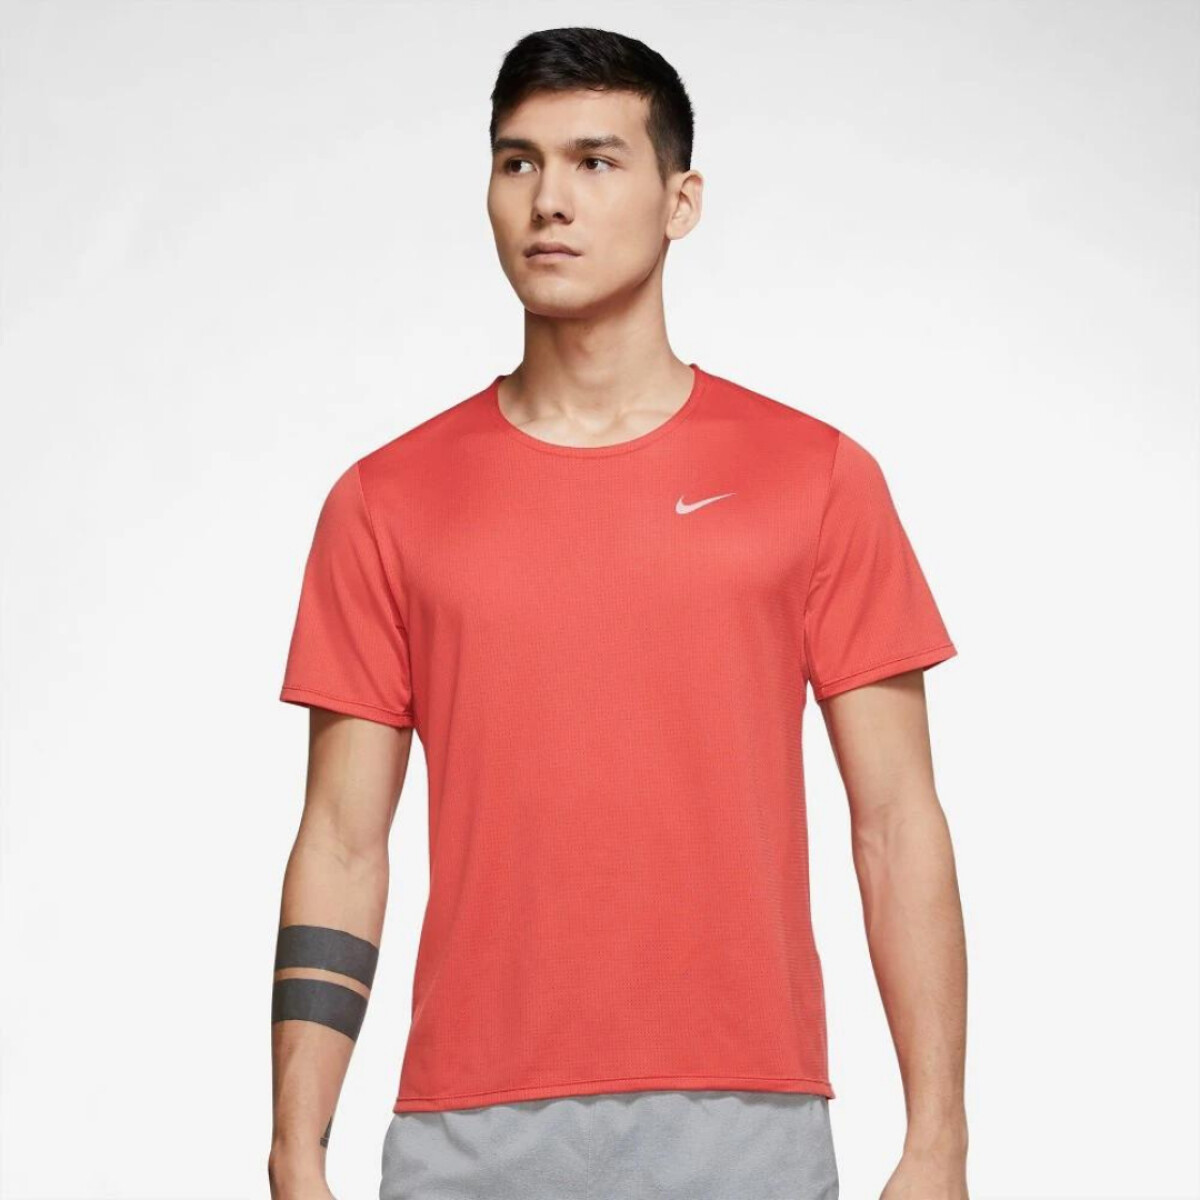 Remera Nike Running Hombre WR Rise 365 - S/C 